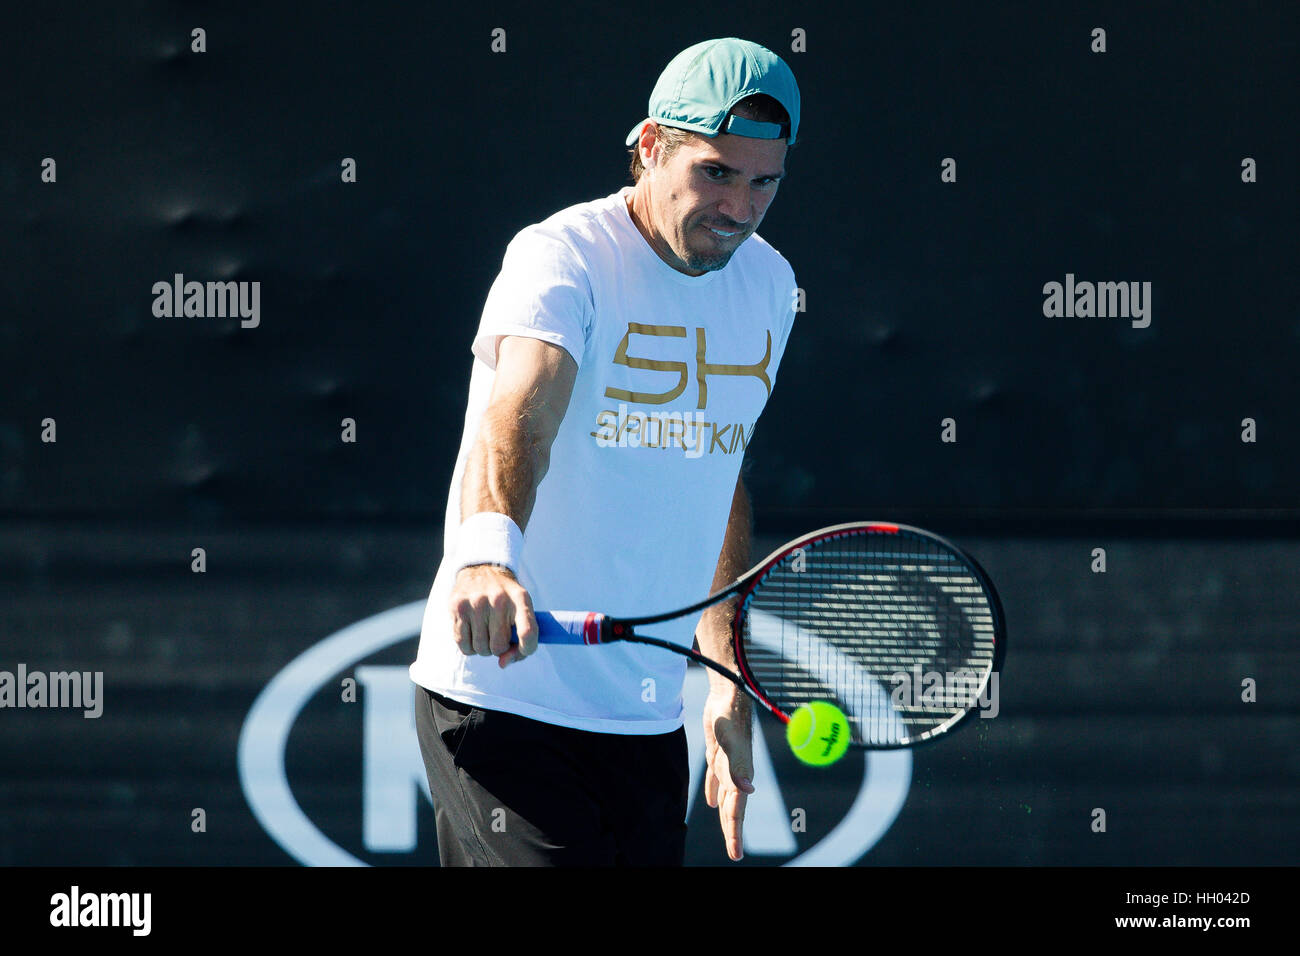 Australia. 15th January Tommy Haas of Germany during a practice session at the 2017 Open at Melbourne Park in Australia. Credit: Frank Molter/Alamy Live News Stock Photo - Alamy